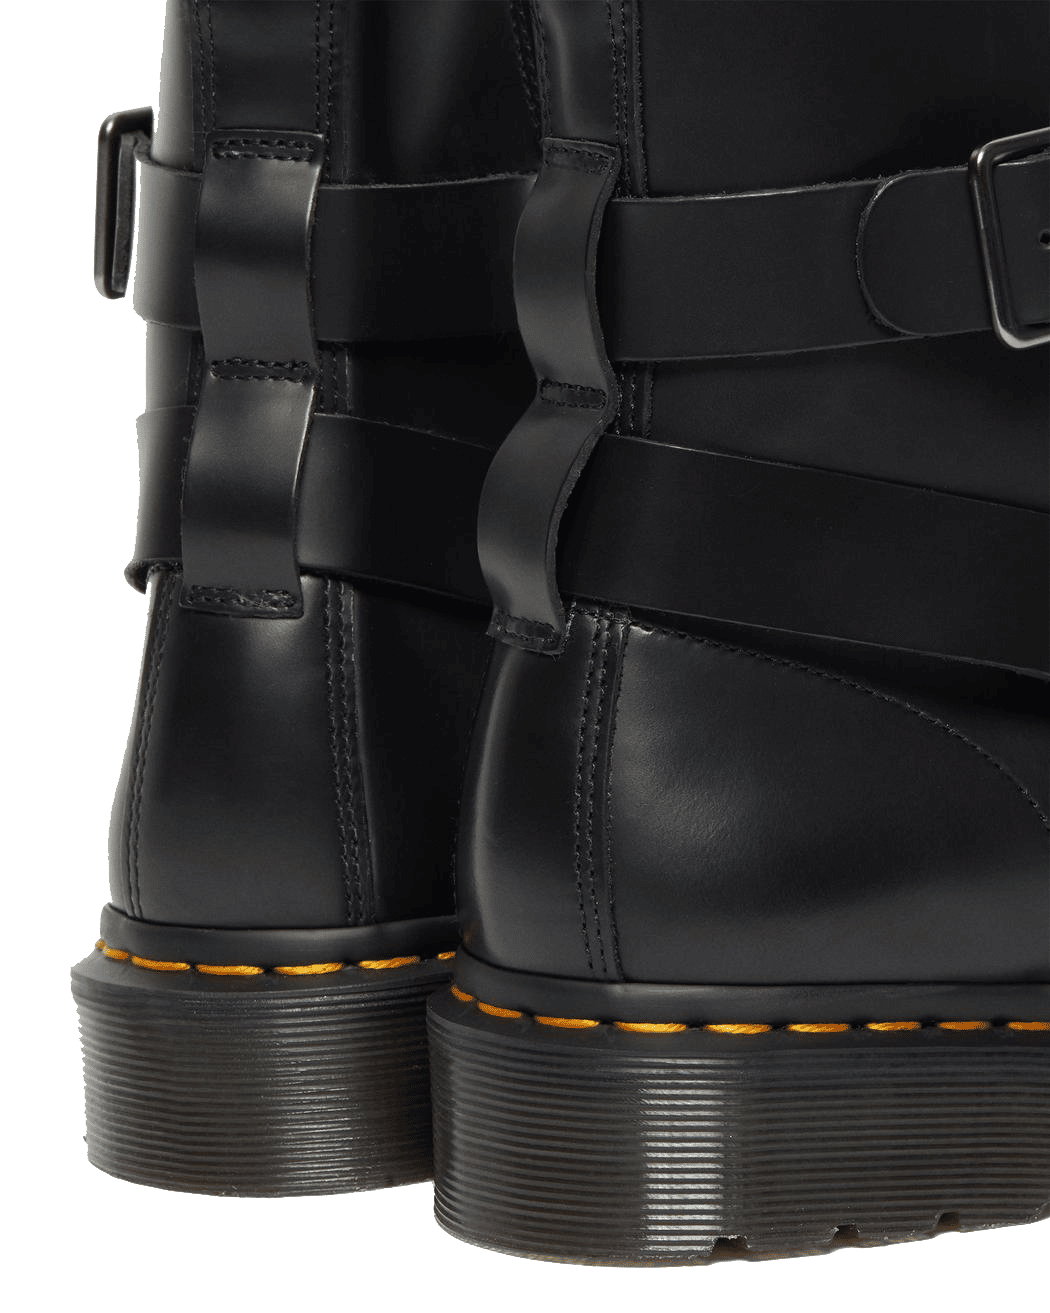 Dr. Martens Leather Harness Lace Up Boots